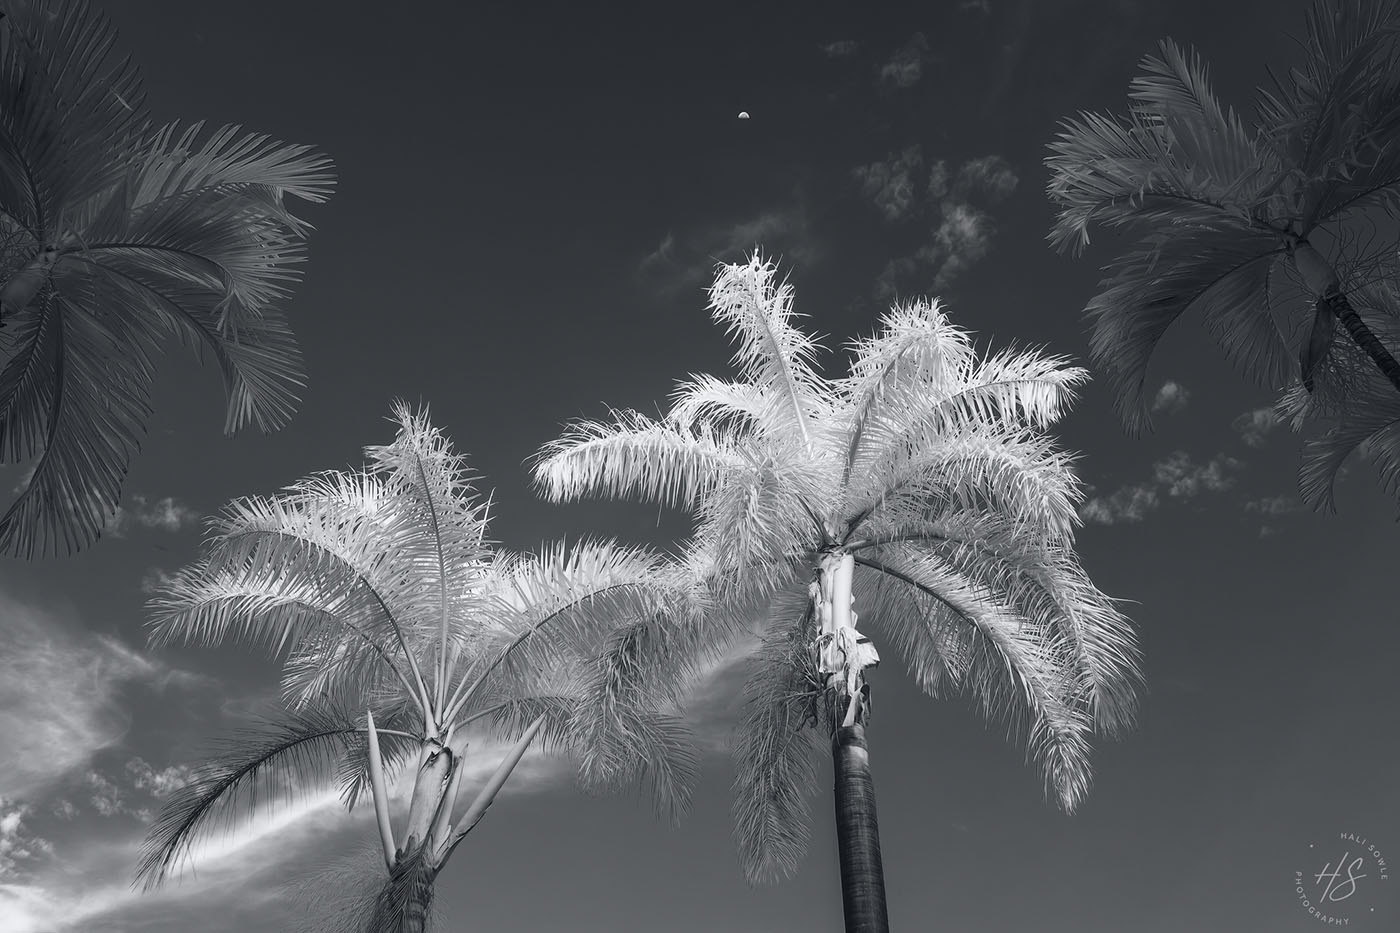 2019_09_Sandals-SouthCoast-10894-Edit1000.jpg - Palm trees and moon, infrared.